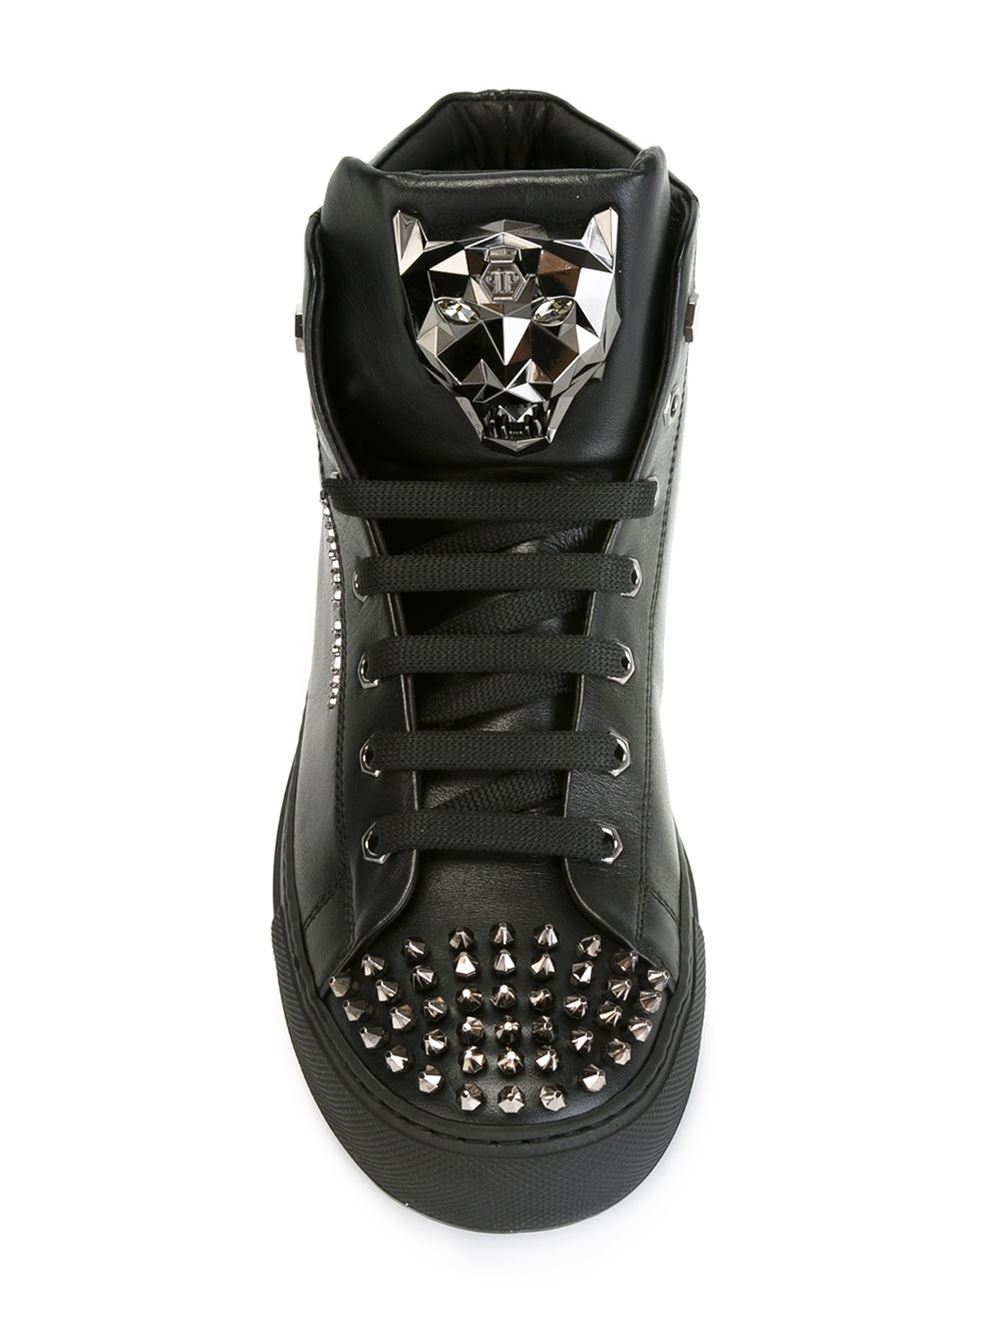 Philipp Plein Spike-Studded Leather High-Top Sneakers in for Men